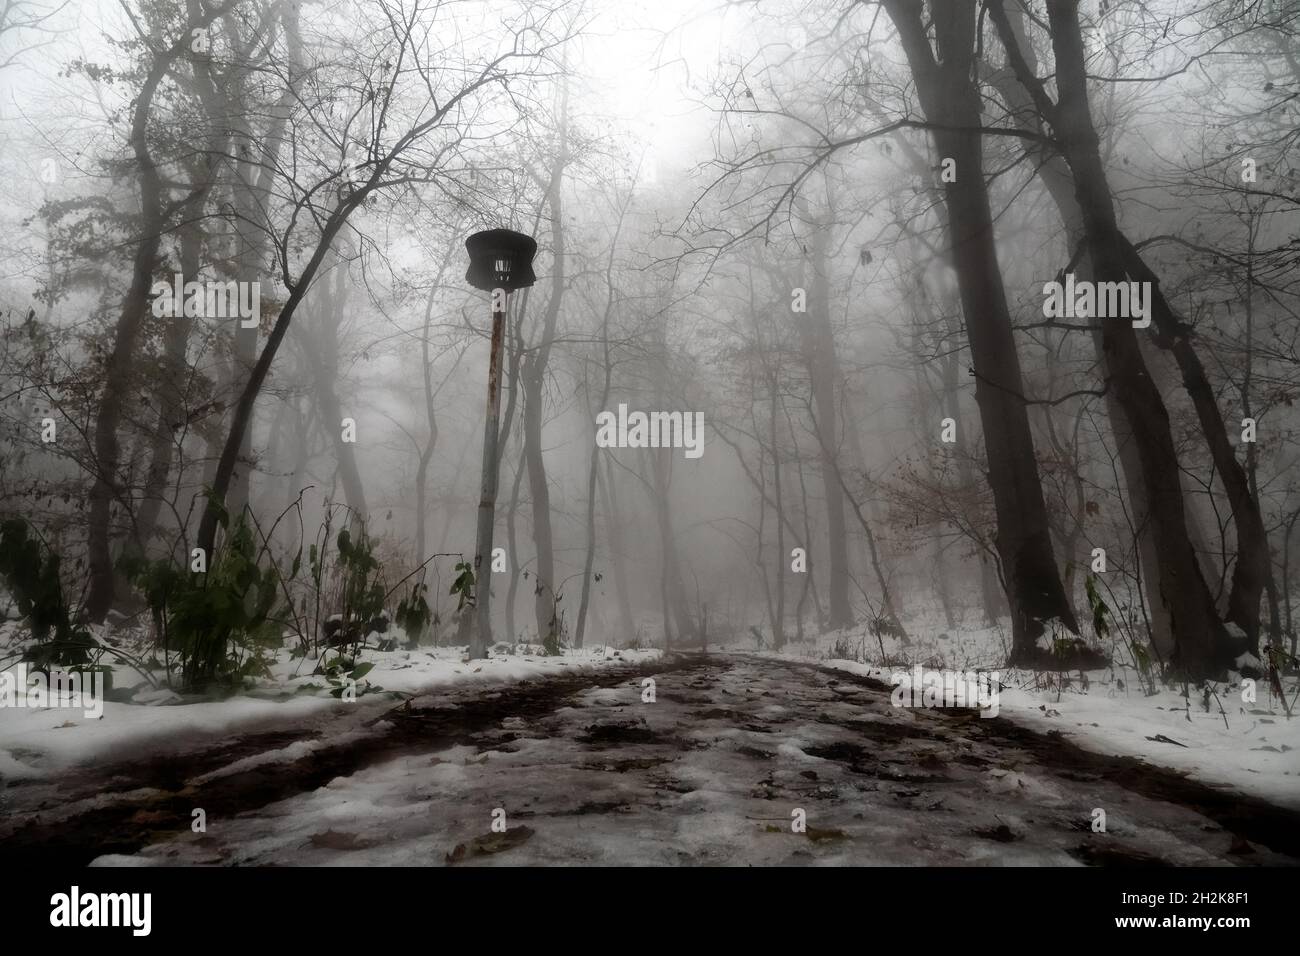 Scotch mist, thick fog hung over the muddy forest road and the wet snow-covered trees of the seaside forest. Unexpected snowfall in the subtropics Stock Photo